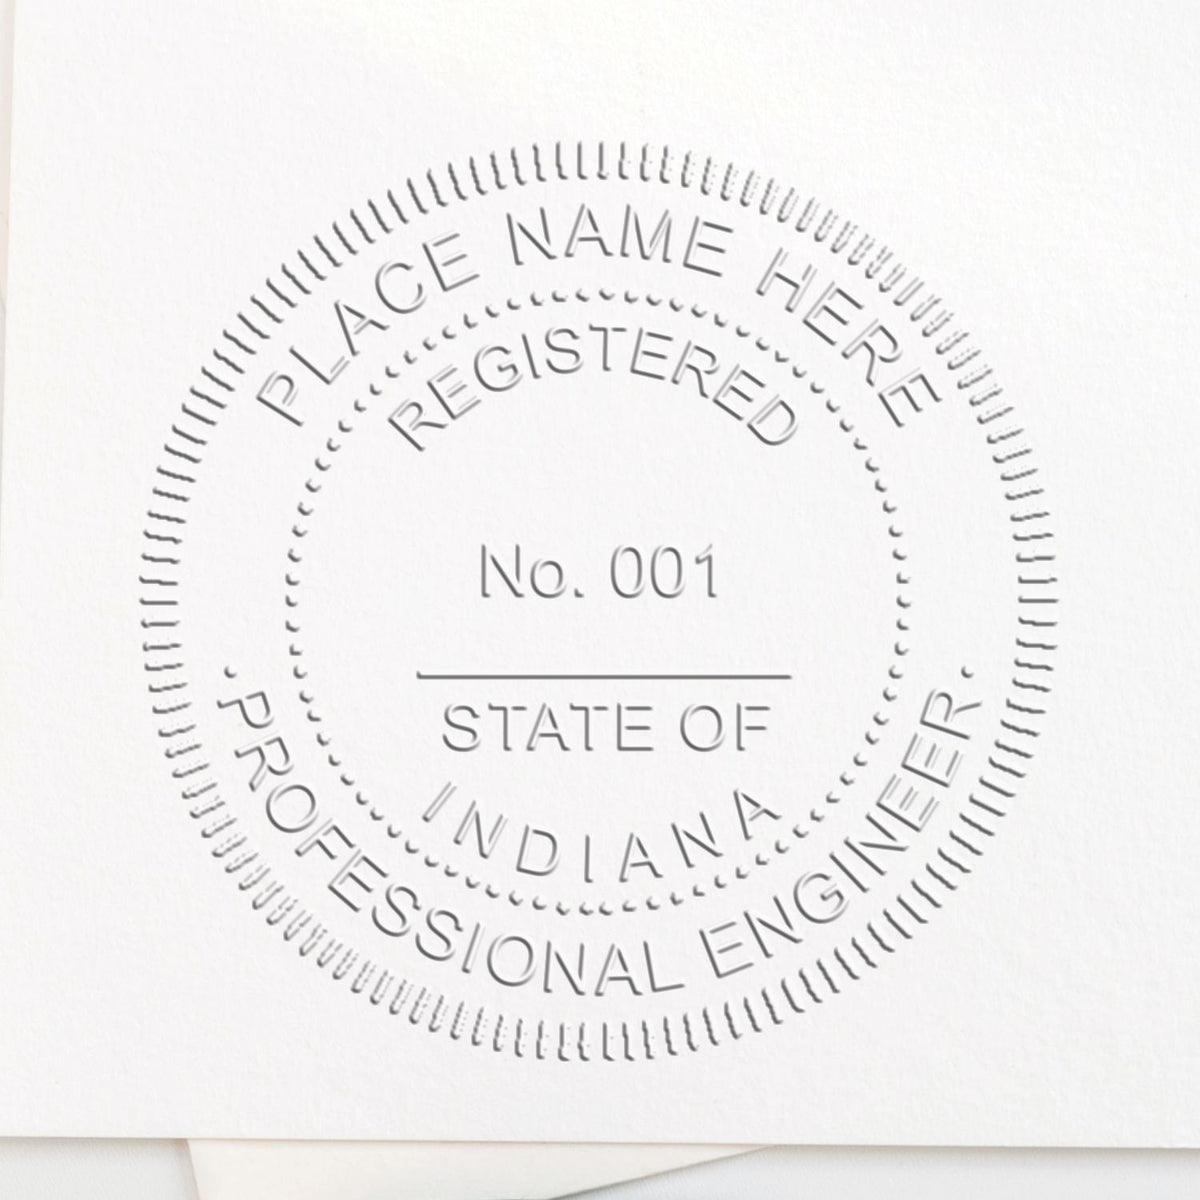 An alternative view of the Heavy Duty Cast Iron Indiana Engineer Seal Embosser stamped on a sheet of paper showing the image in use